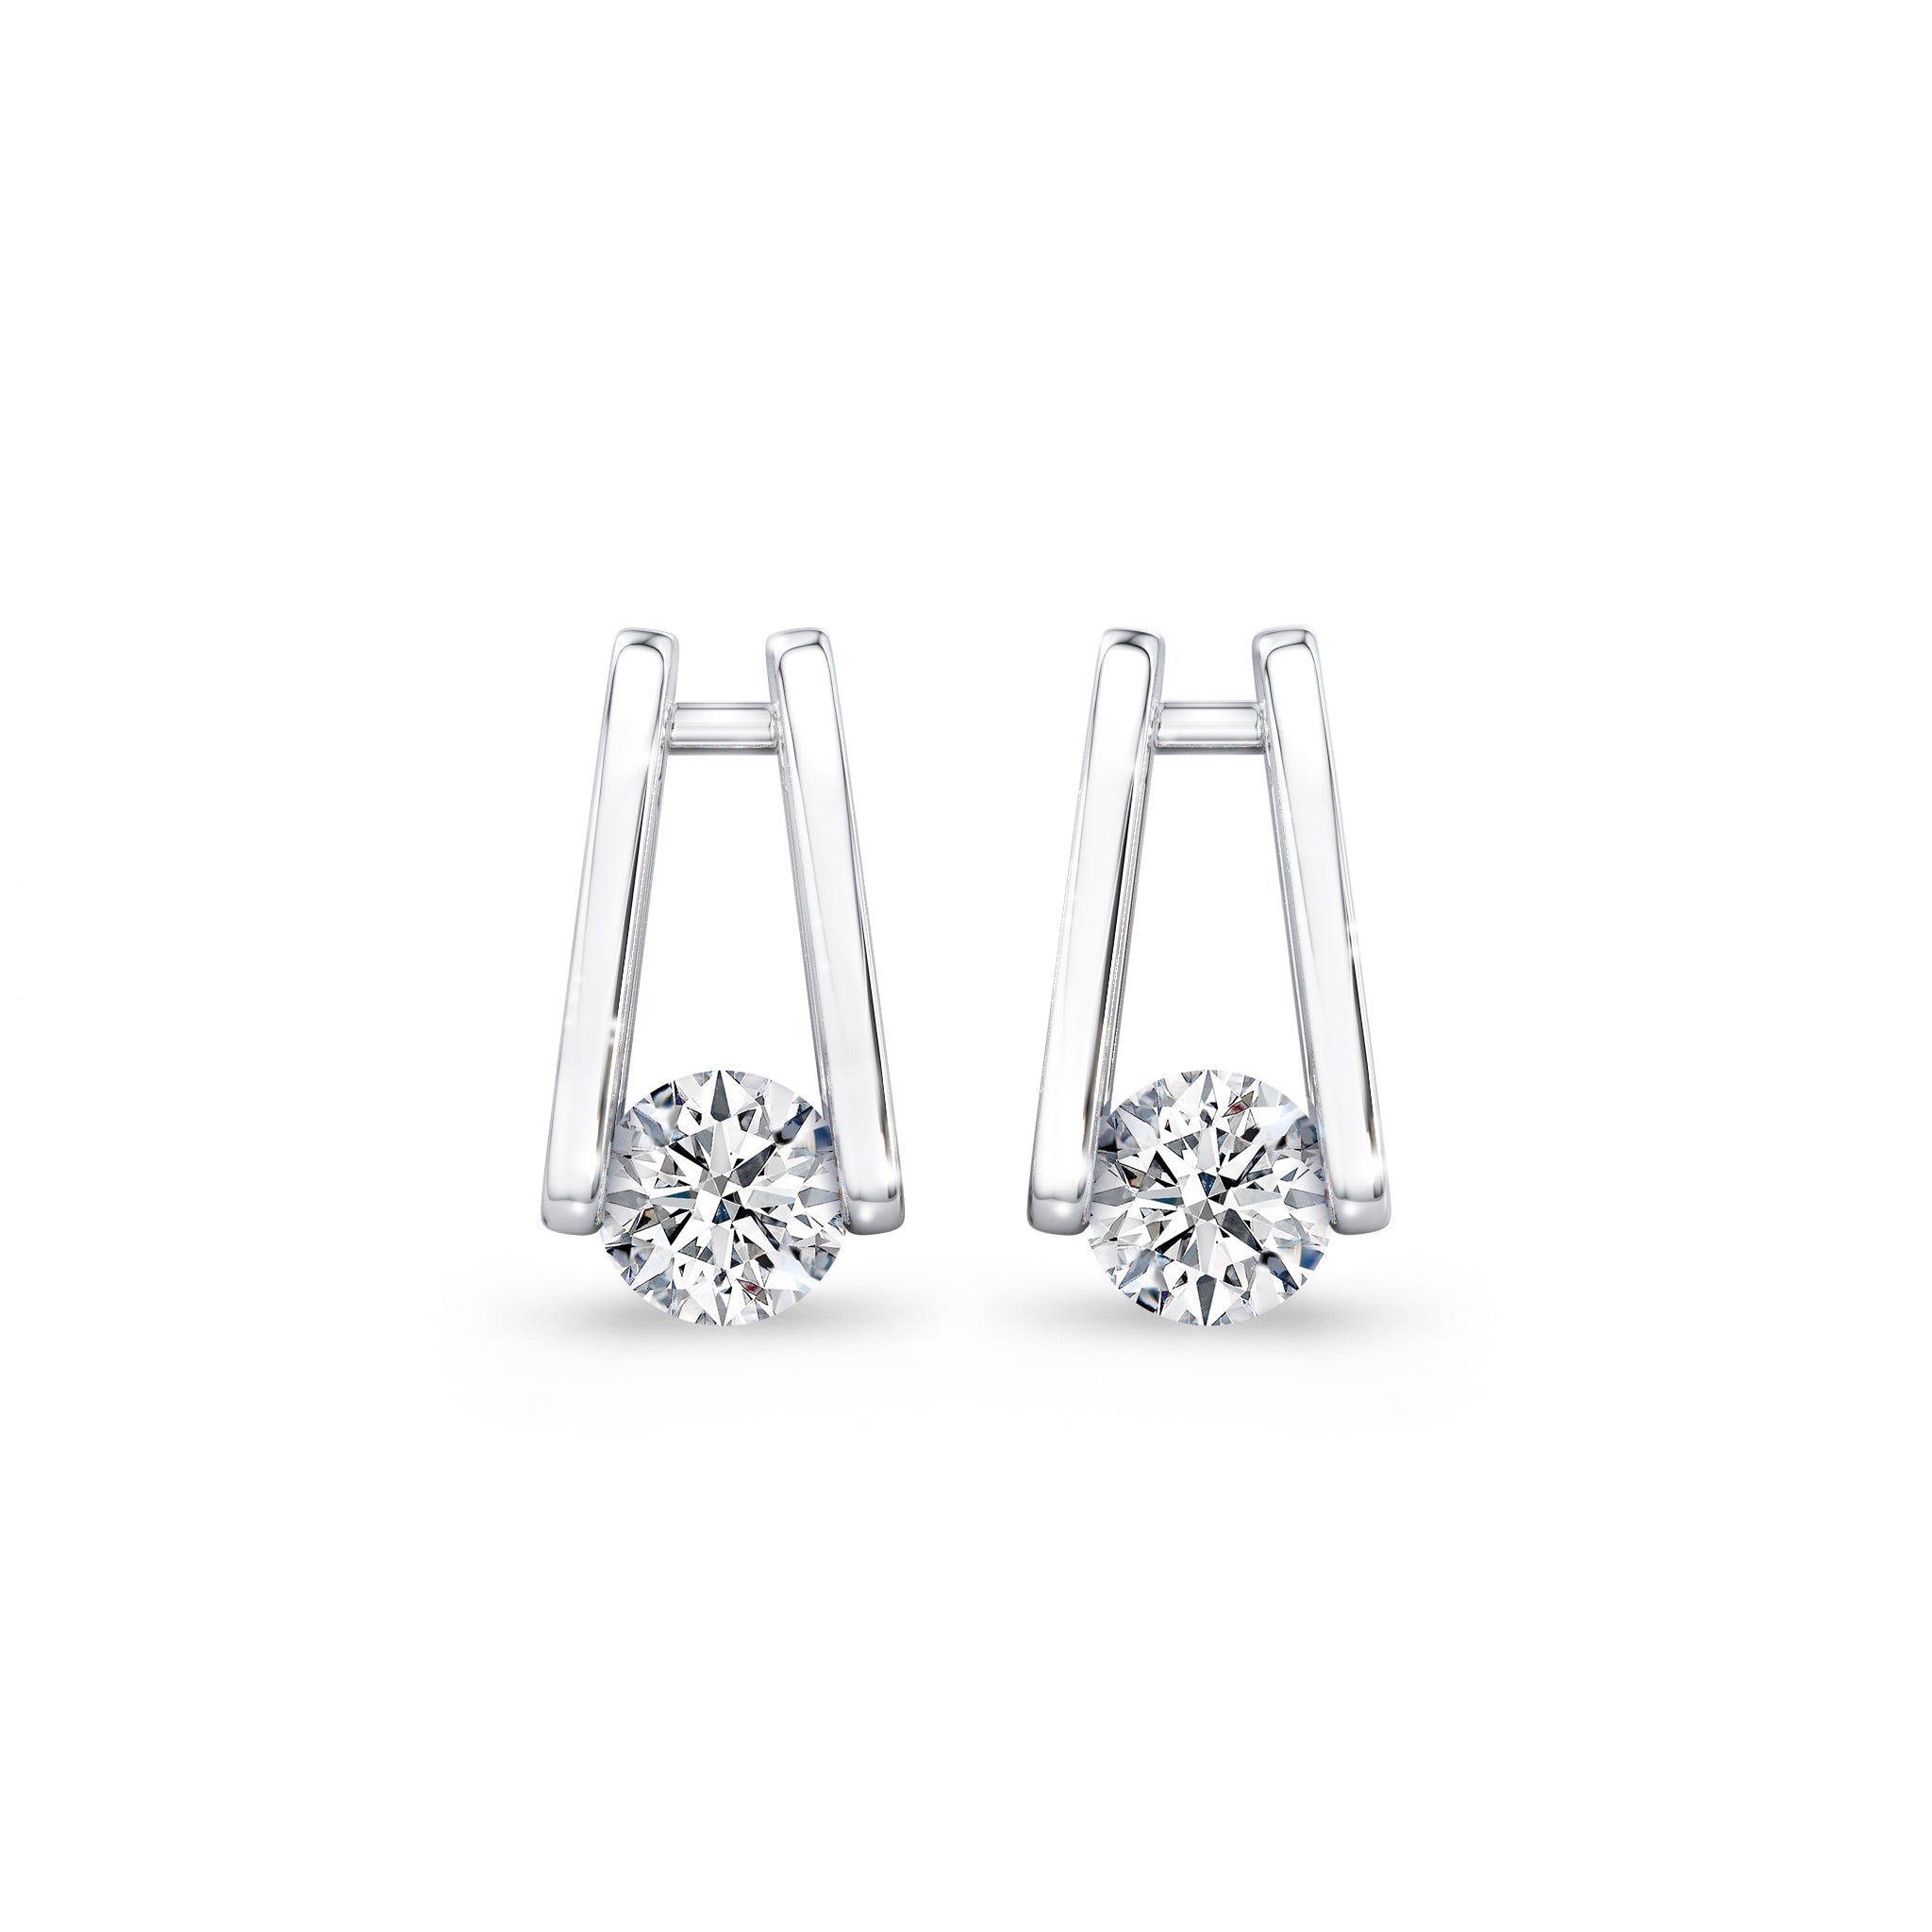 Millennium Classic Diamond Stud Earrings 0.50 Carat in 18K White Gold Front View